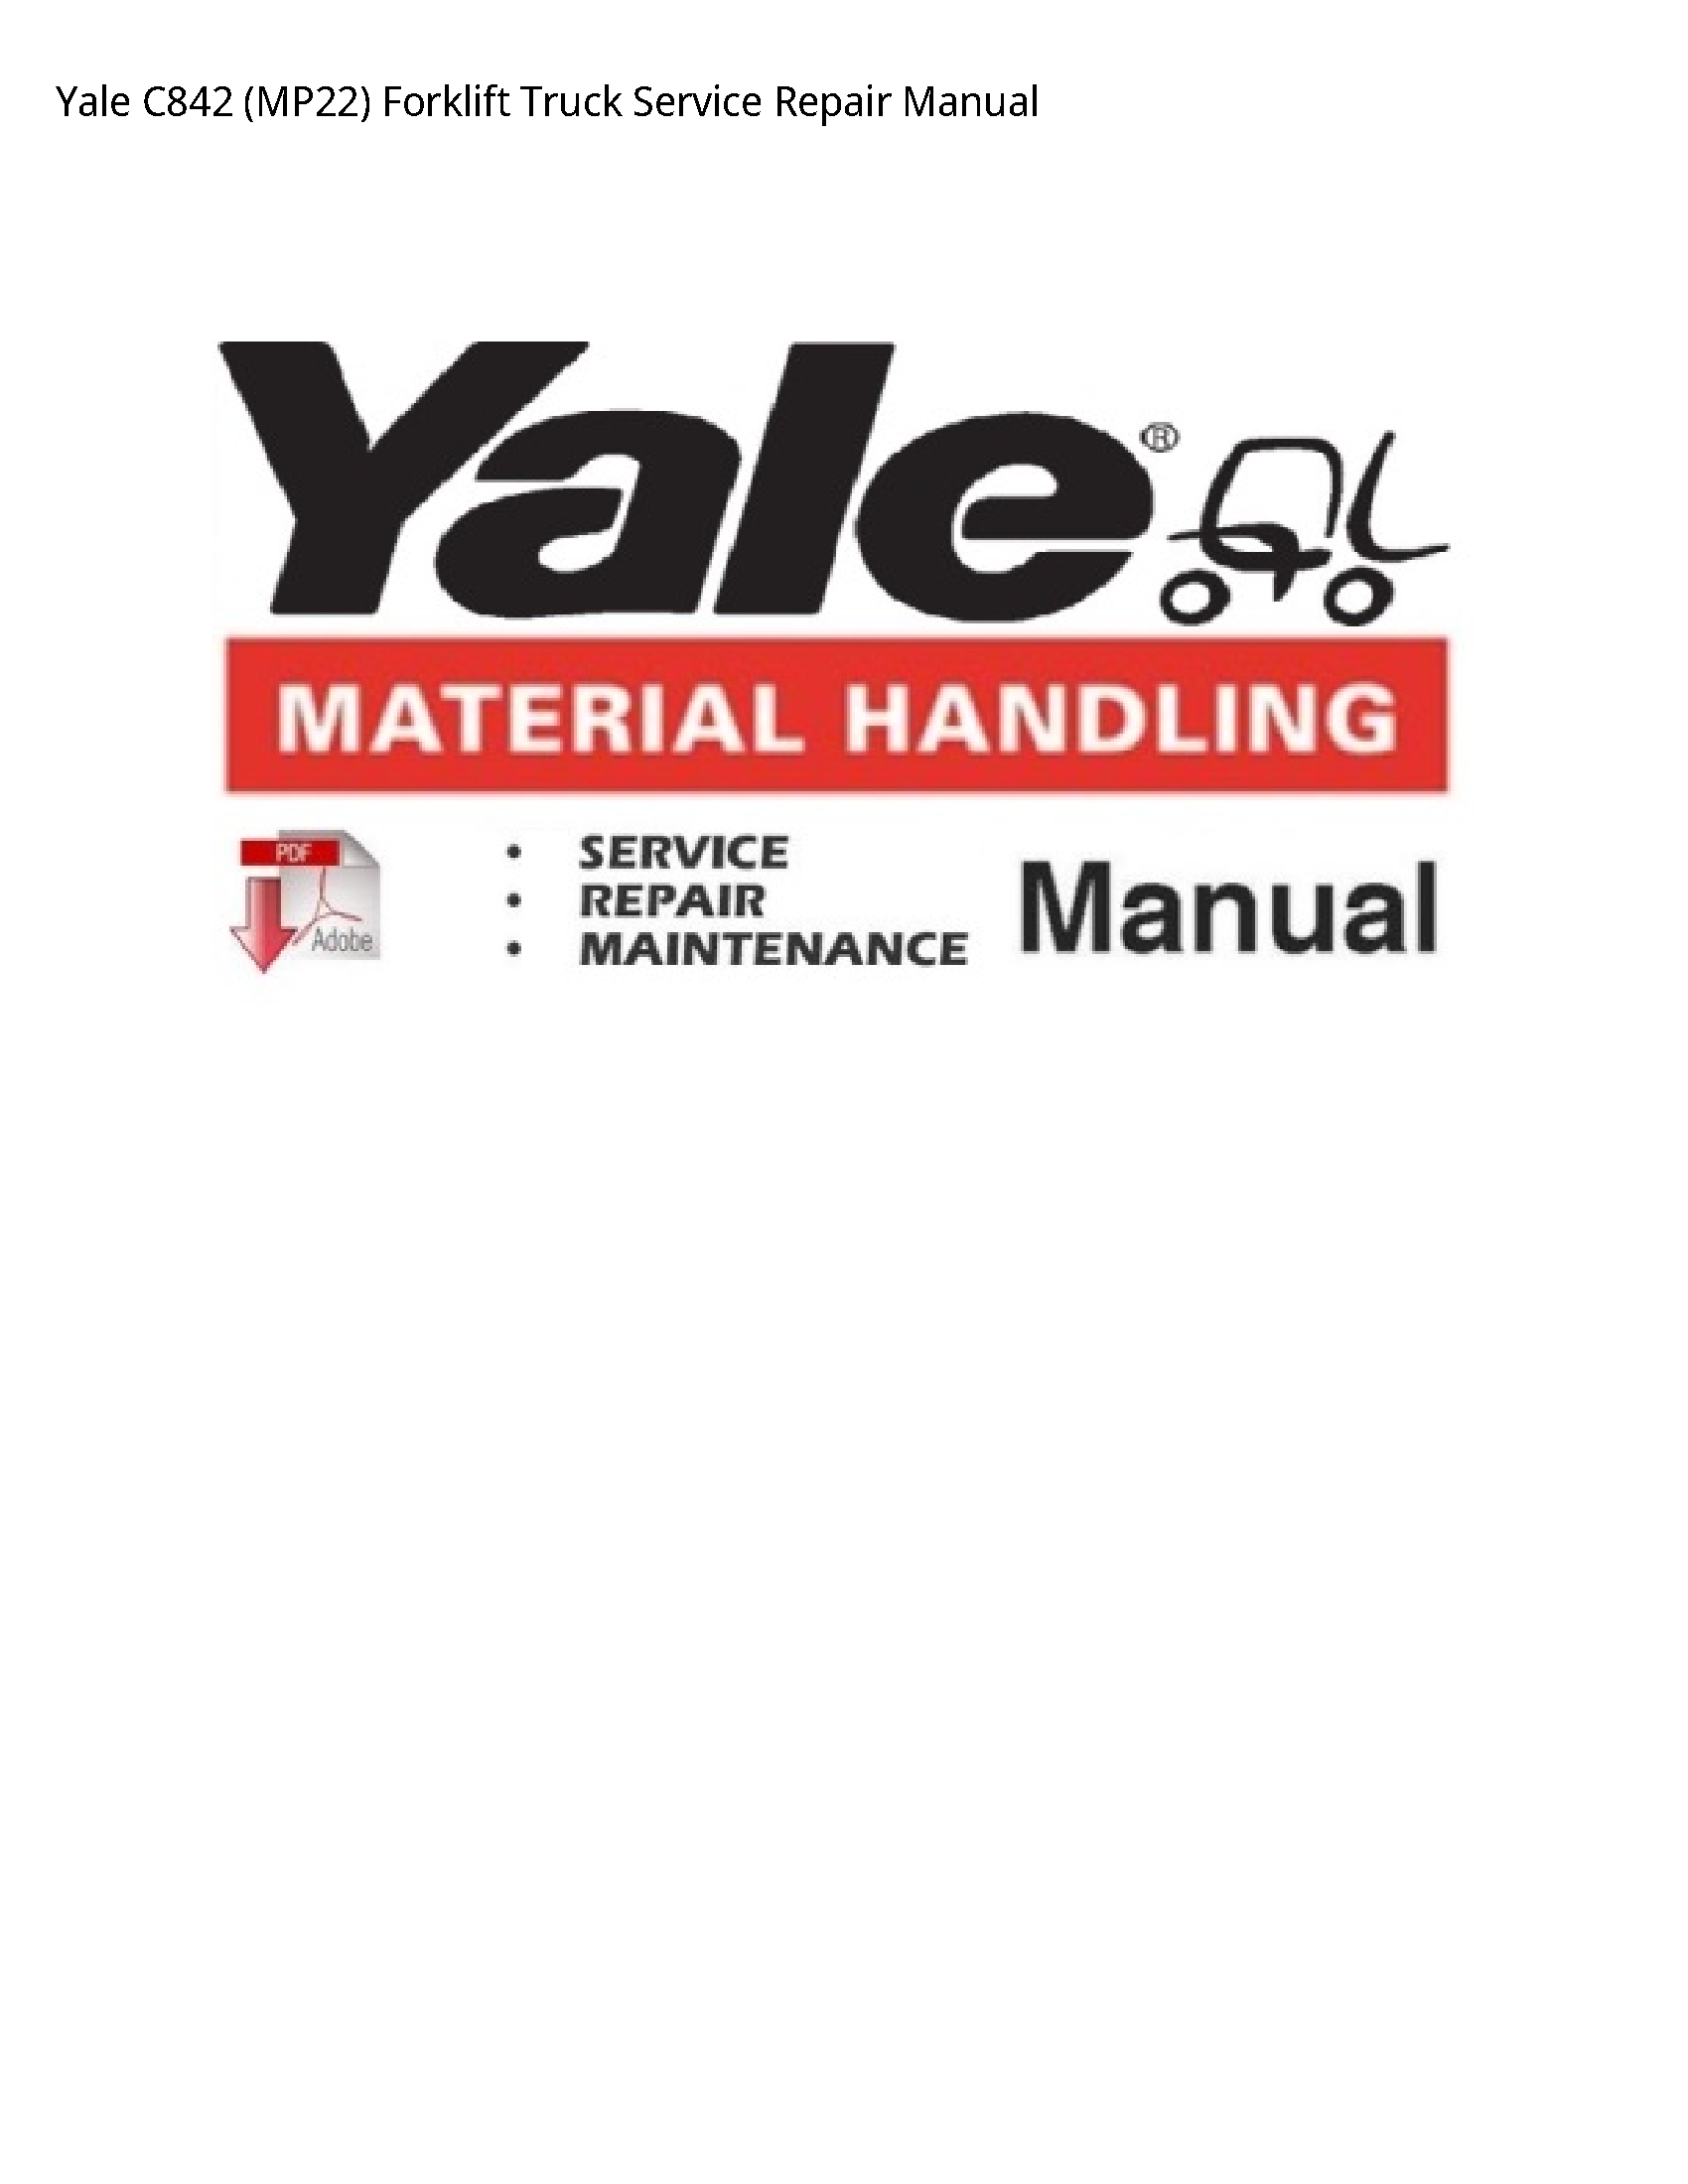 Yale C842 Forklift Truck manual